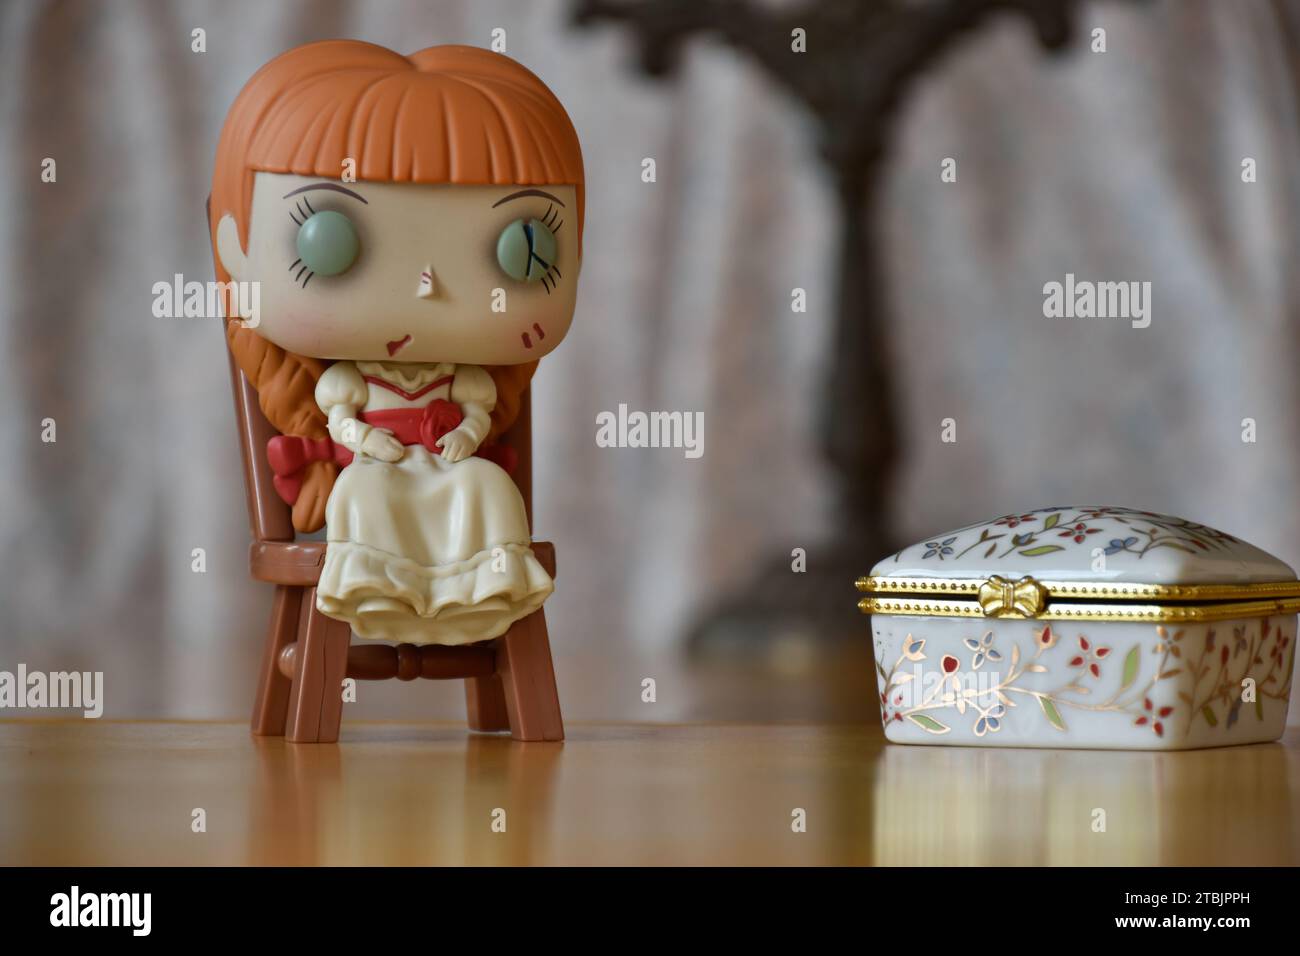 Funko Pop action figure of haunted doll Annabelle from The Conjuring horror films. Vintage interior, old candlestick, white printed jewelry box. Stock Photo